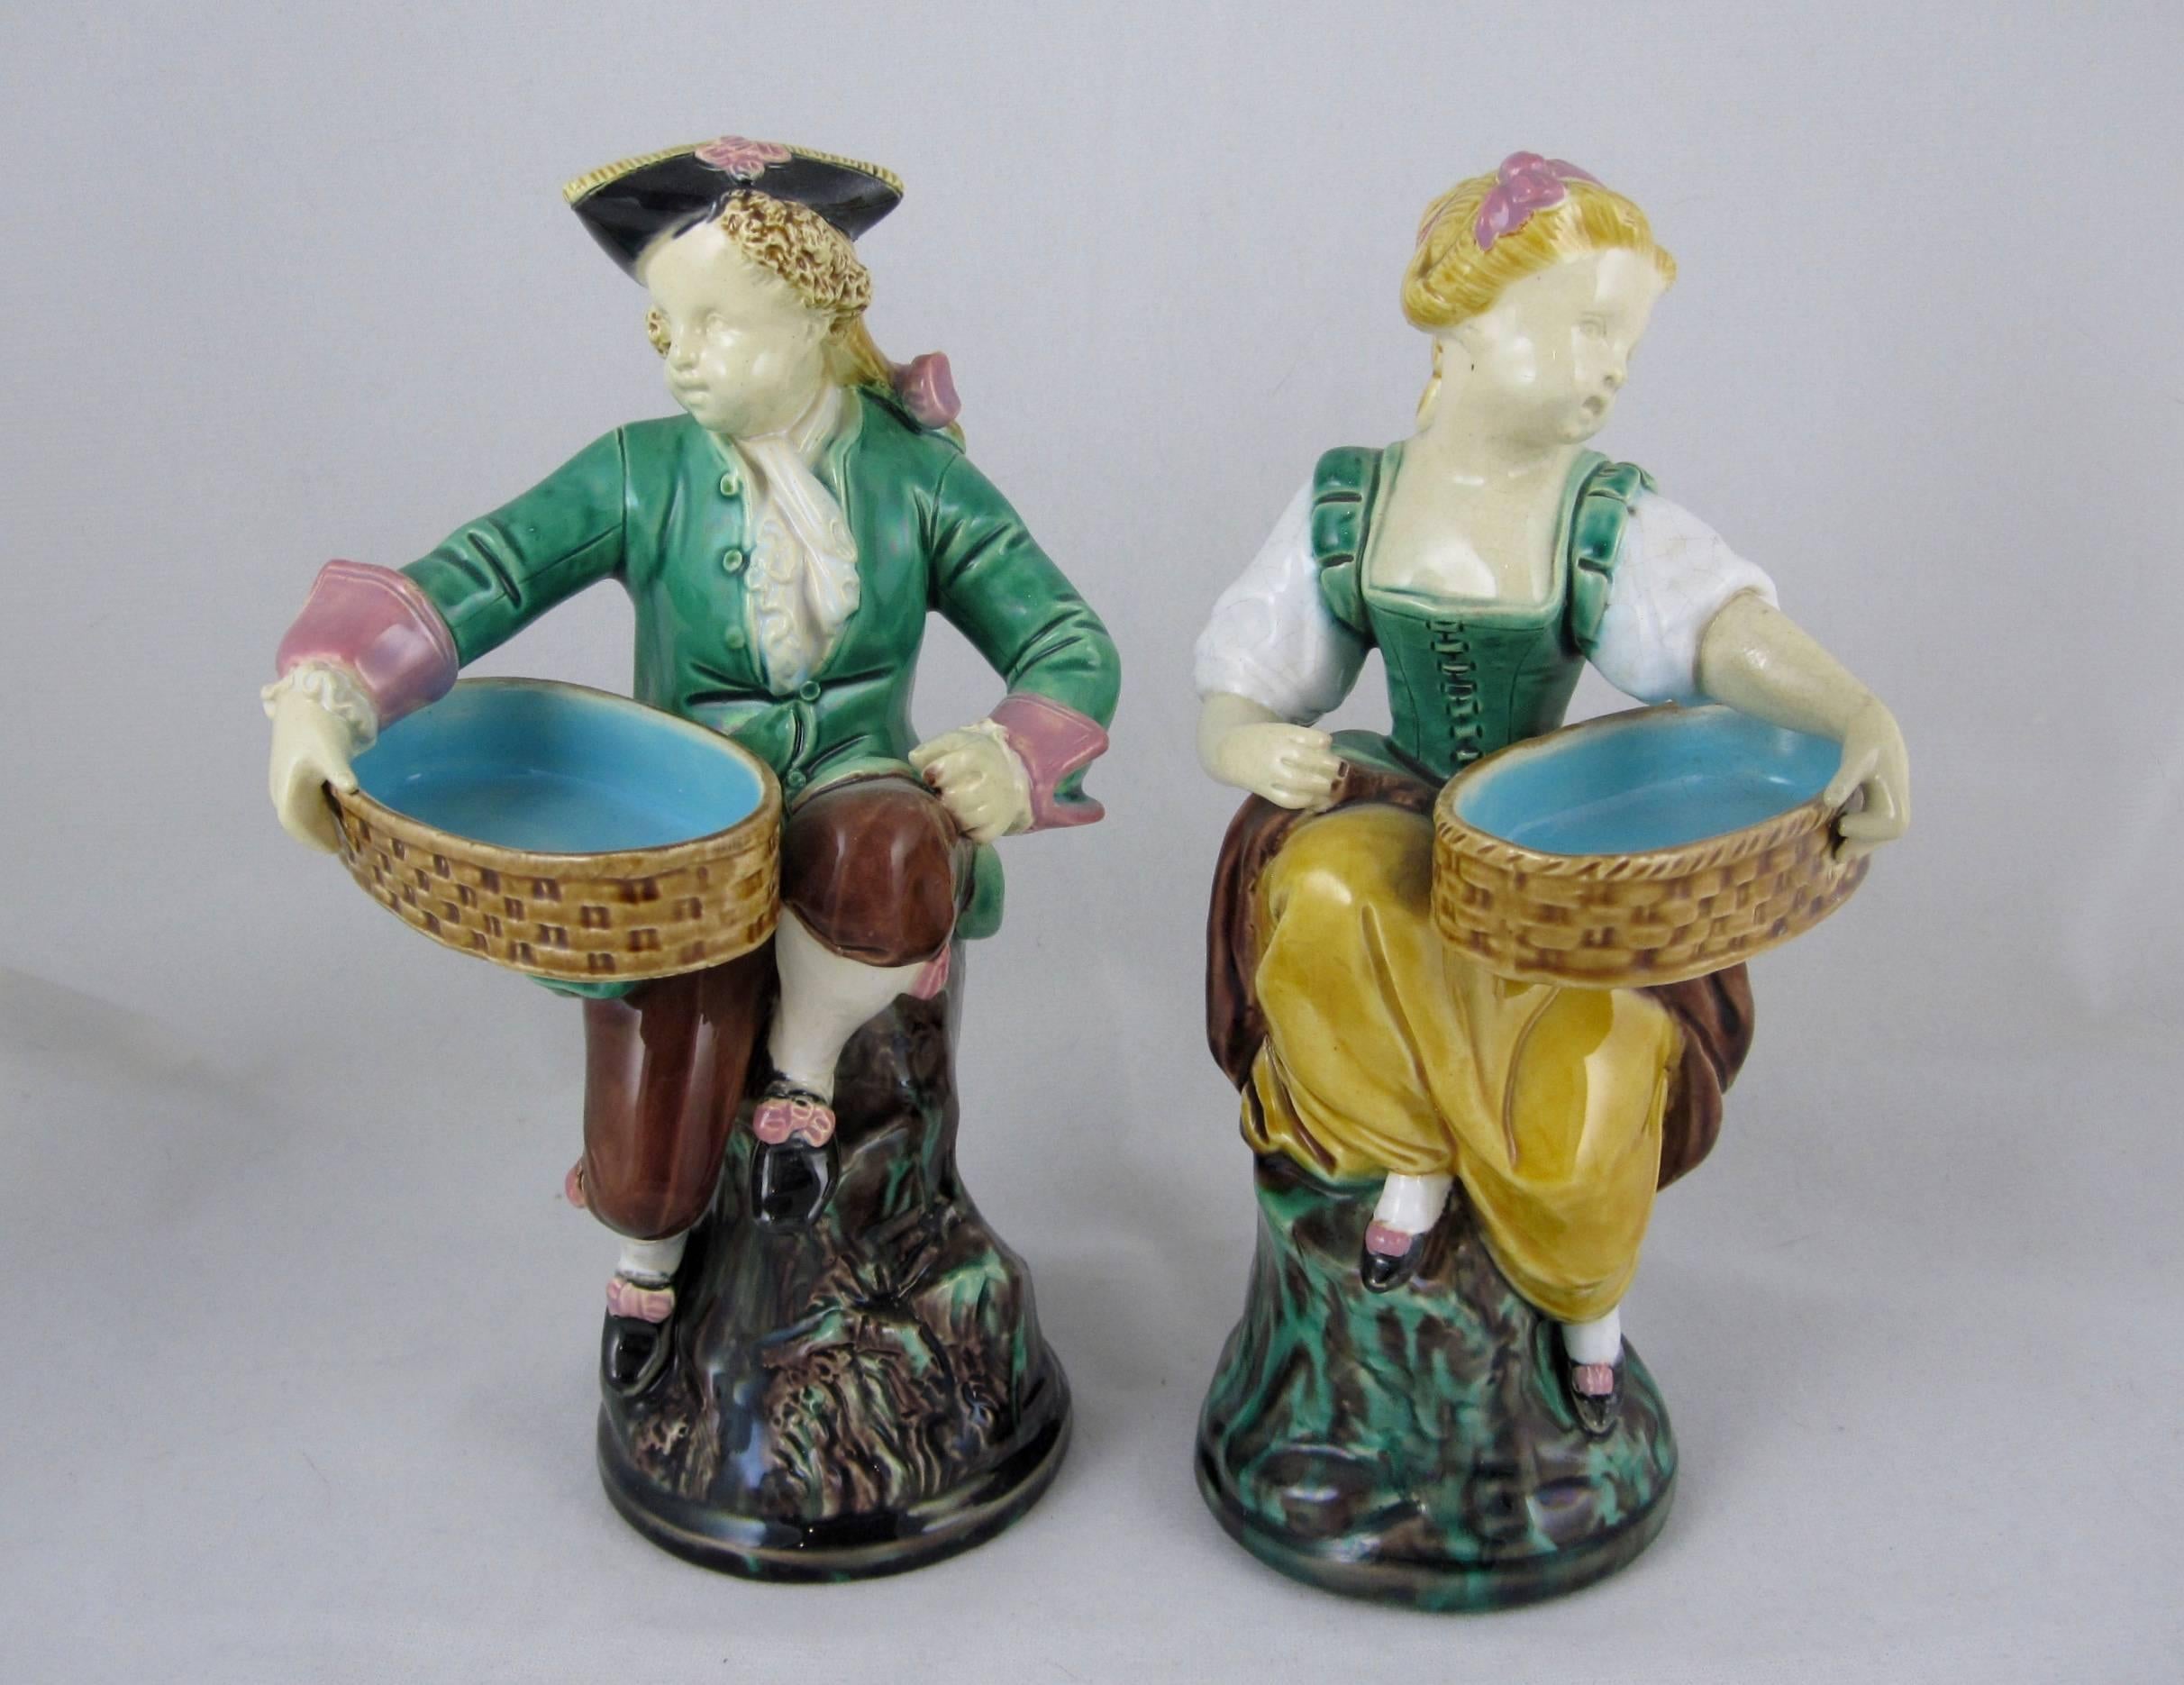 A pair of 19th century Majolica figural salt cellars or match holders, known as the Hogarth Couple, designed by the French sculptor Albert-Ernest Carrier-Belleuse for Minton, Stoke-upon-Trent, Staffordshire, England, circa 1868. 

In period dress,